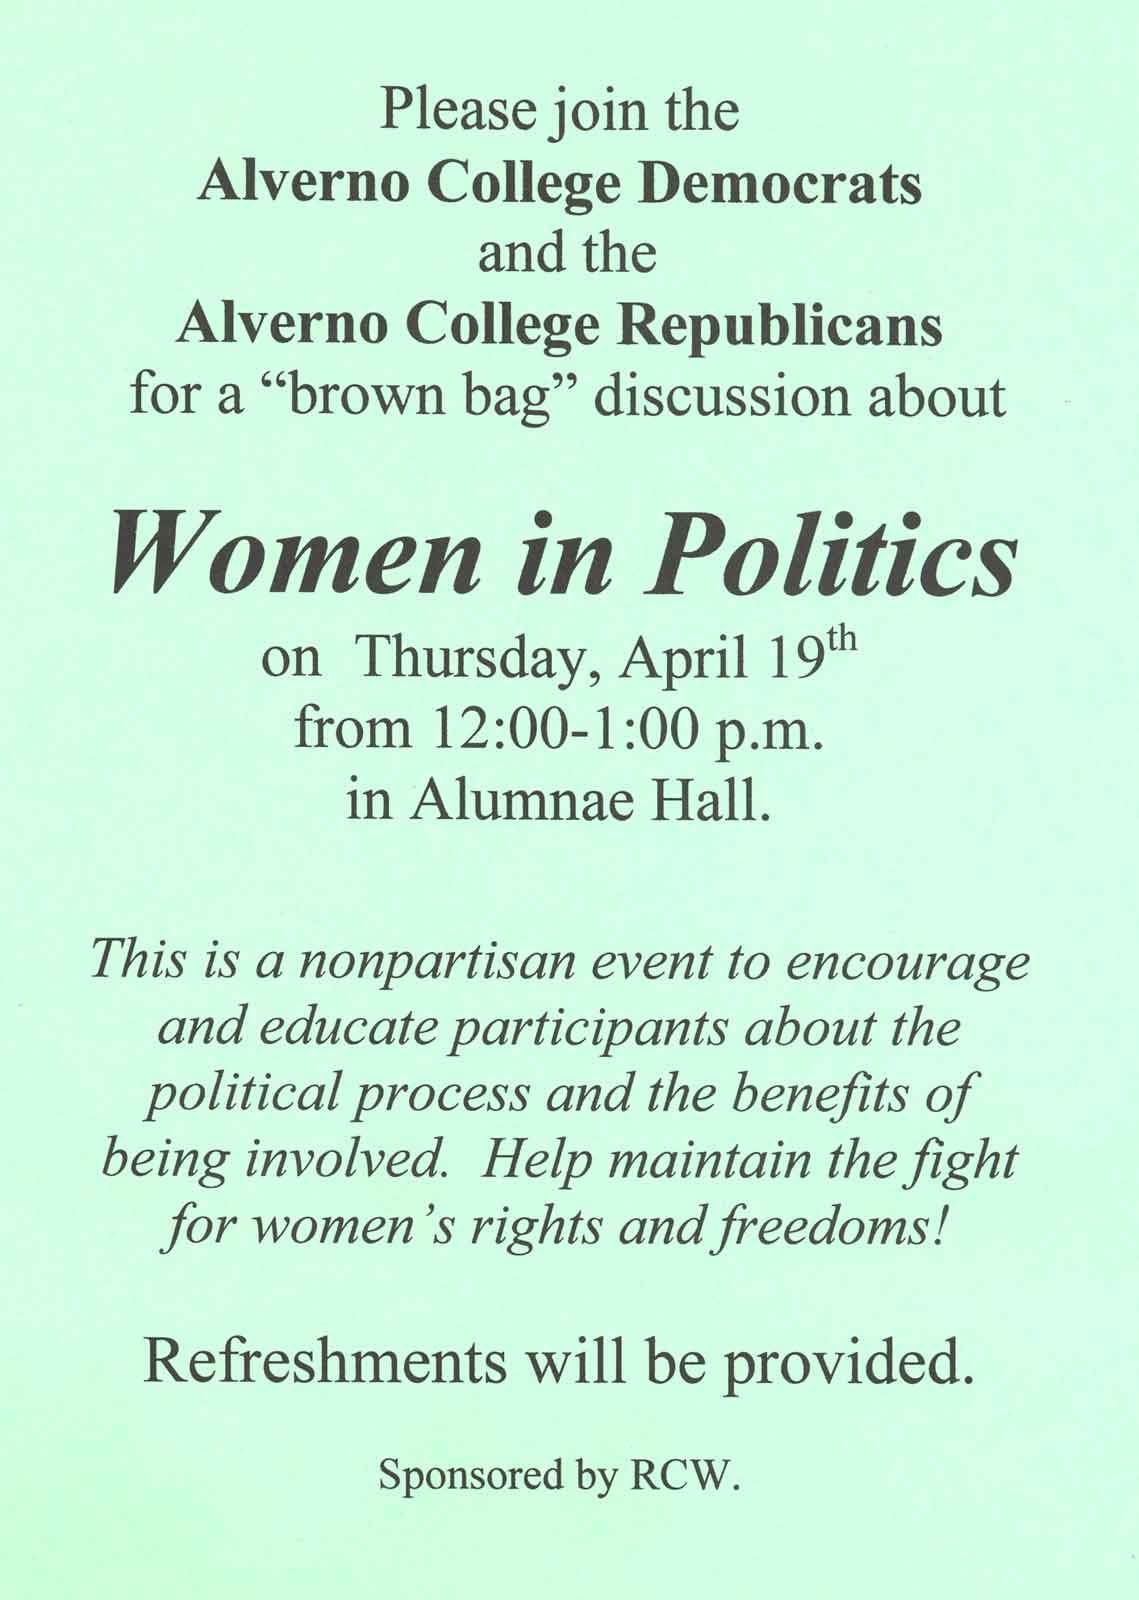 "Women in Politics" flyer for an RCw-sponsored brown bag session.